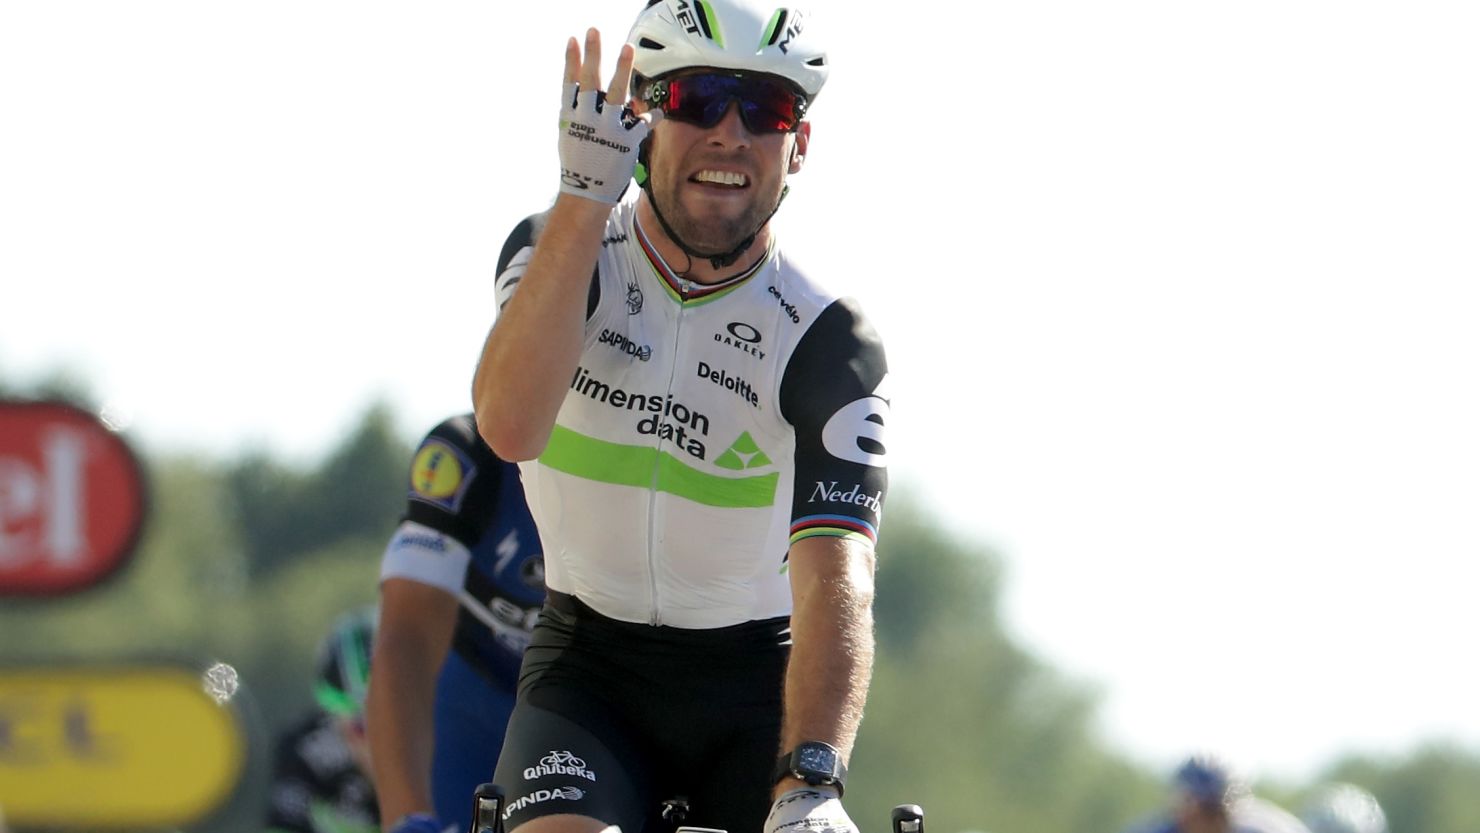 Mark Cavendish holds up four fingers after taking the 14th stage of the Tour de France for Team Dimension Data -- his fourth in this year's race.